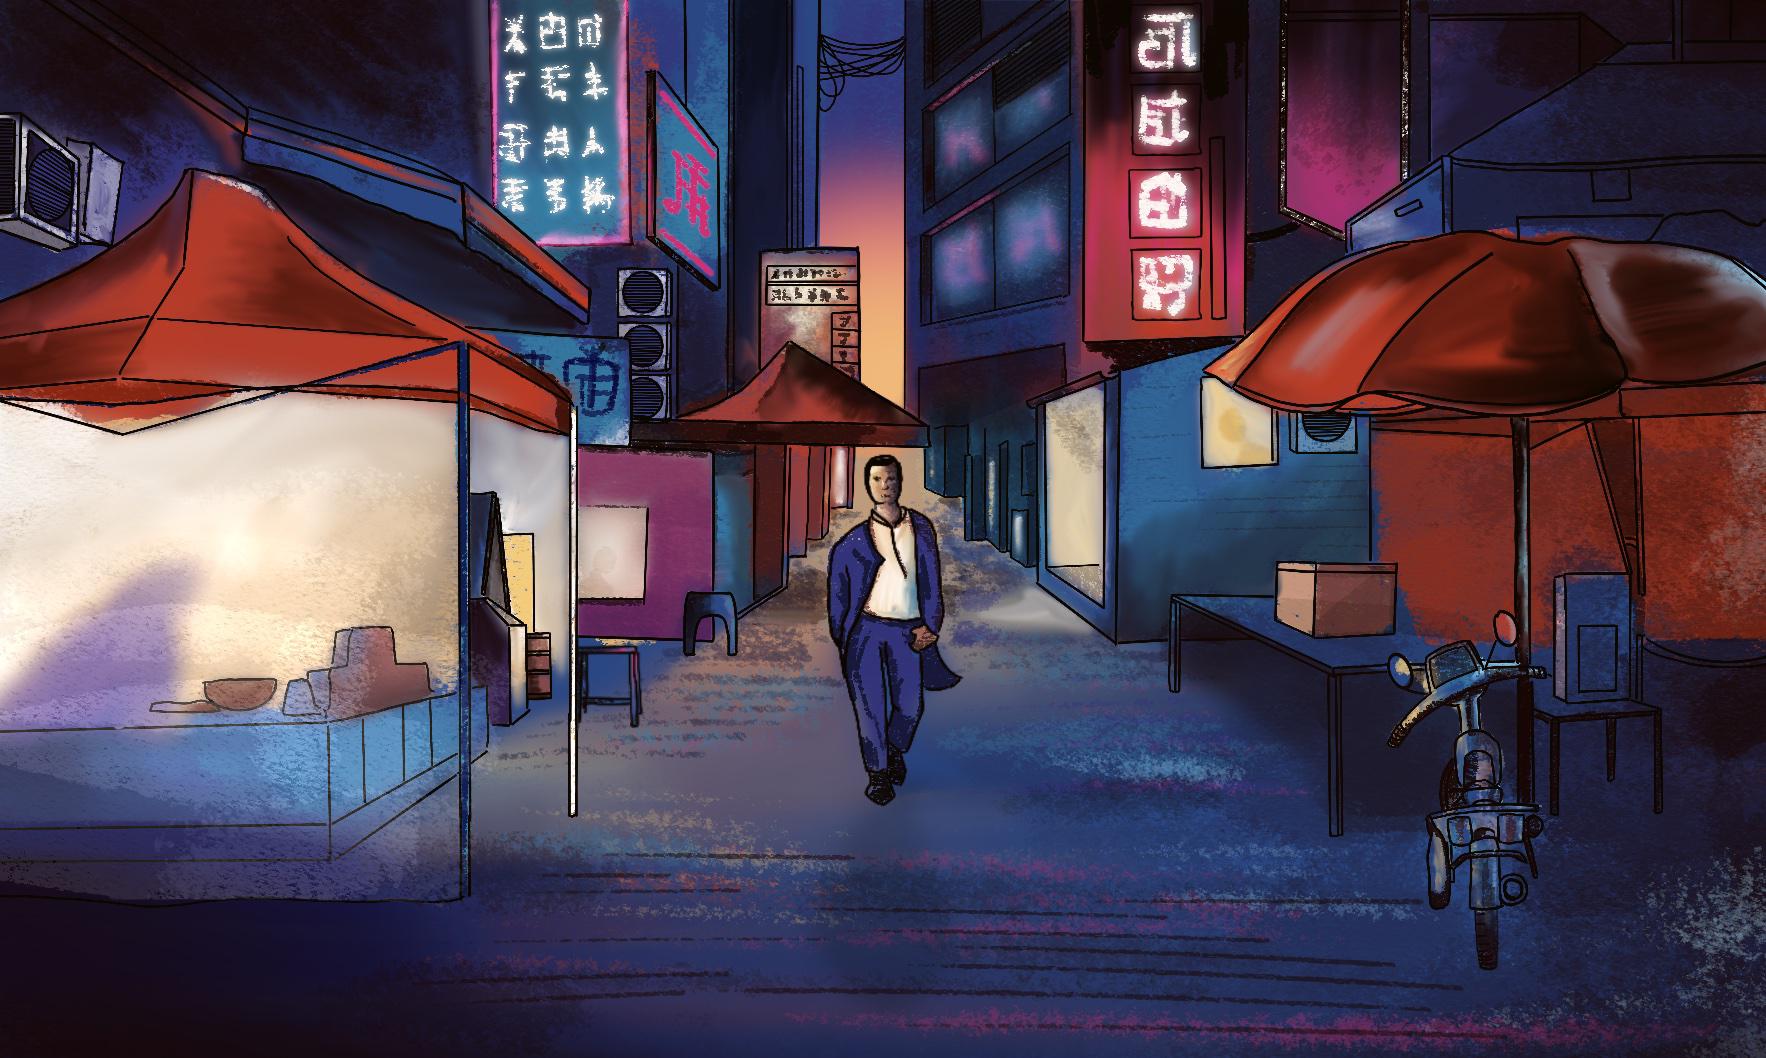 A digital painting of a street at night by Adam Westbrook